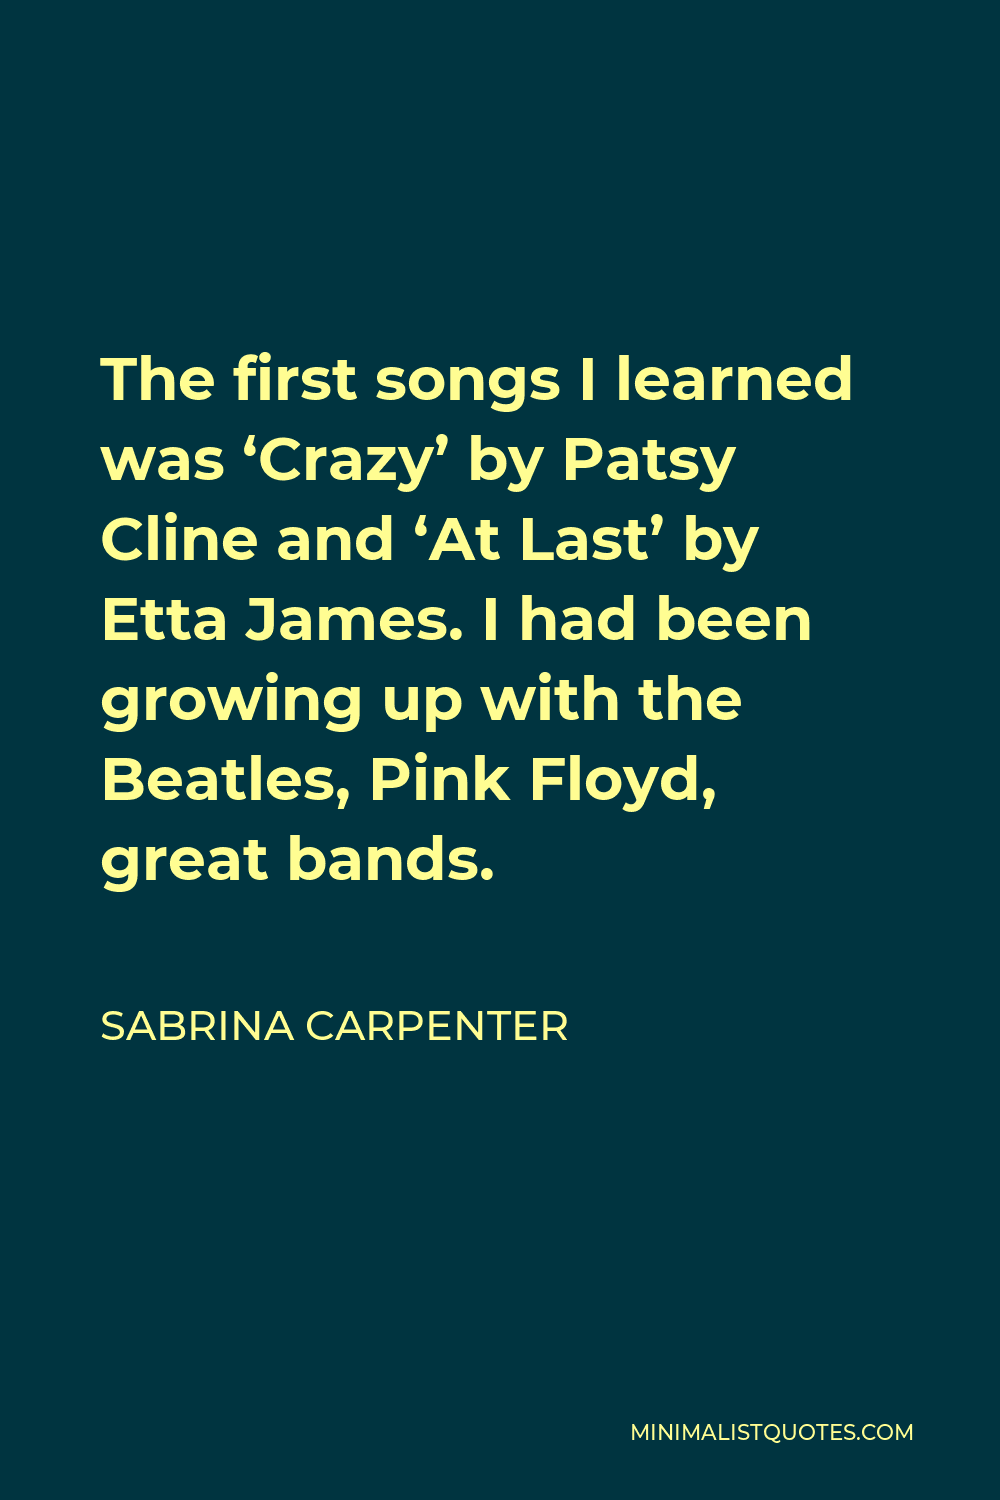 Sabrina Carpenter Quote - The first songs I learned was ‘Crazy’ by Patsy Cline and ‘At Last’ by Etta James. I had been growing up with the Beatles, Pink Floyd, great bands.